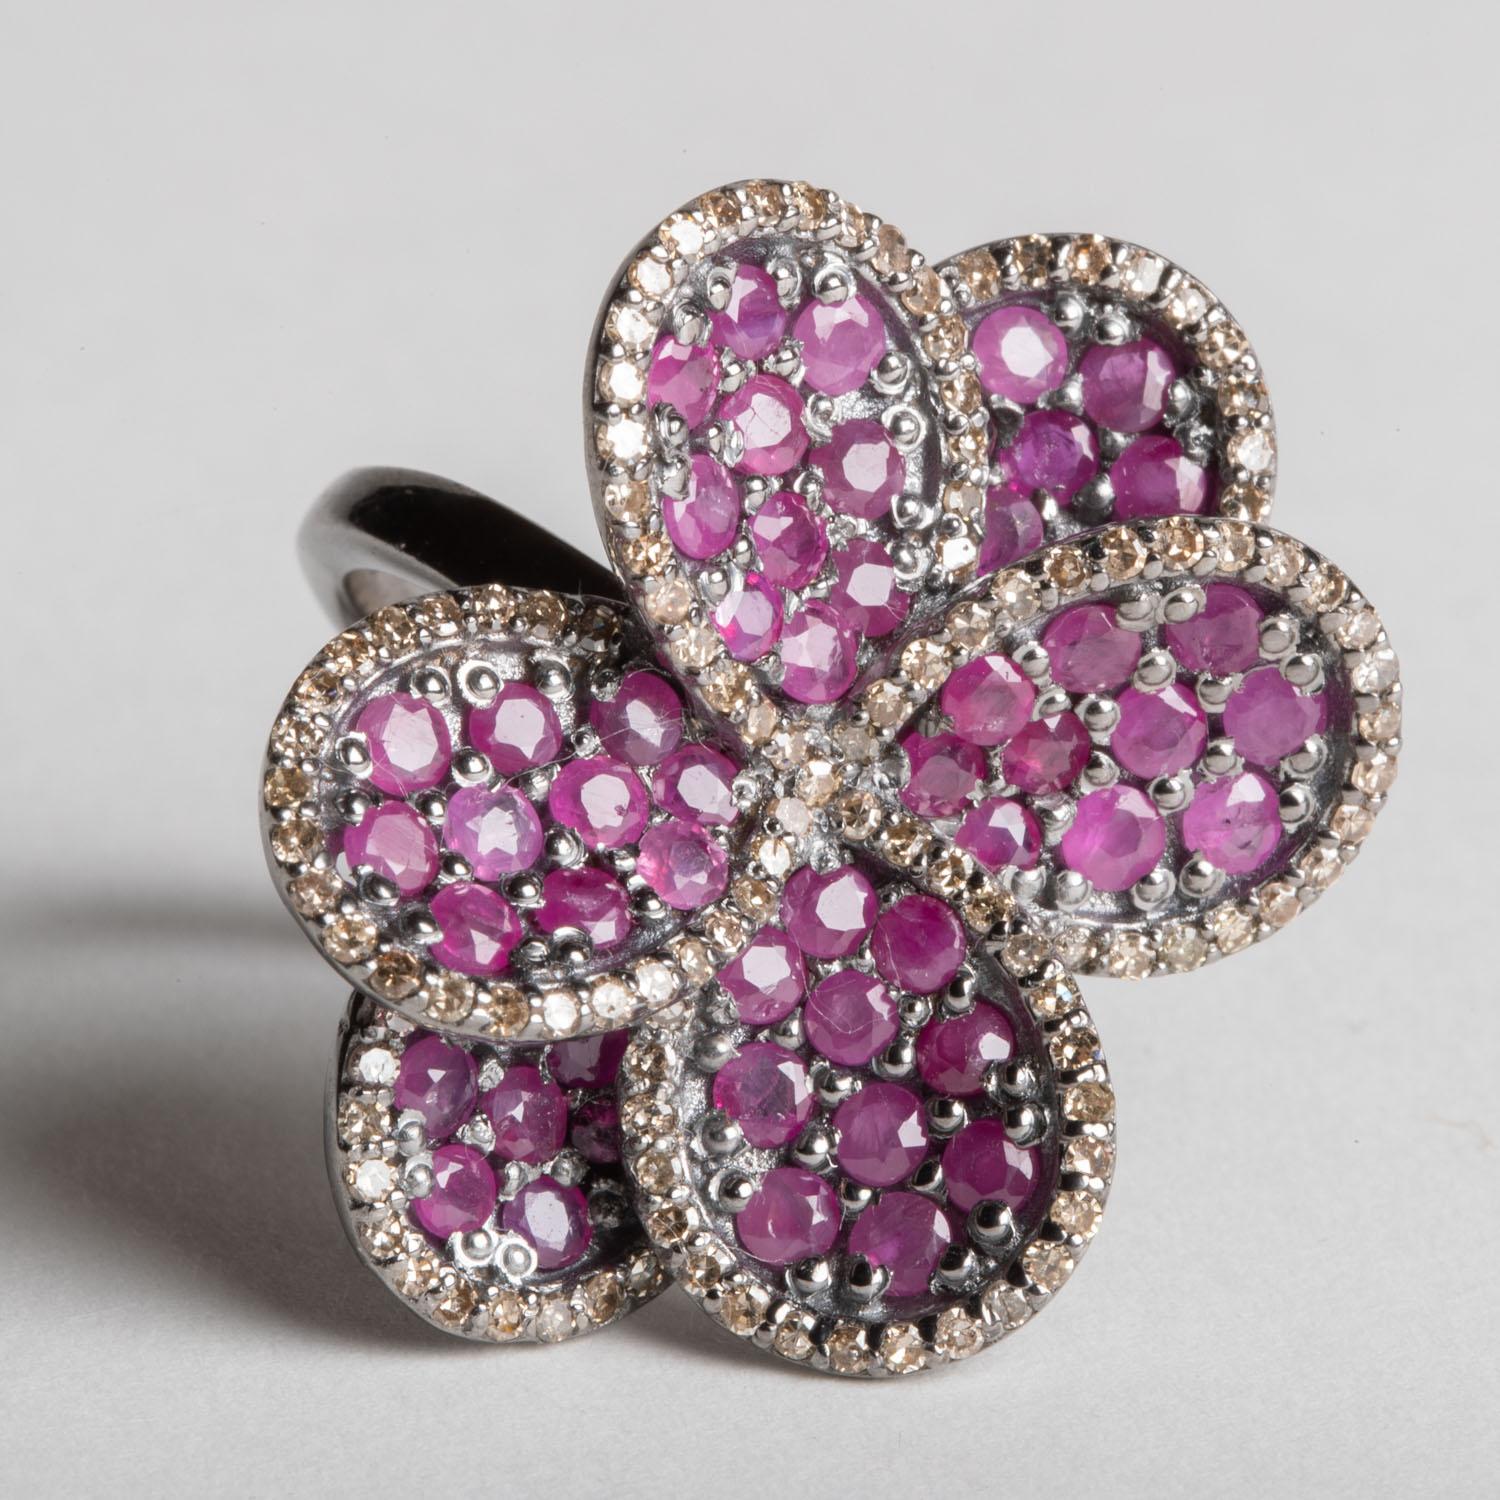 A striking ring of flower petals in round, faceted Burmese pink rubies bordered with round, brilliant cut diamonds, all in a pave` setting.  In sterling silver.  Ring size is 7.75.  Carat weight of rubies totals 5.22; diamonds total 1.12 carats. 